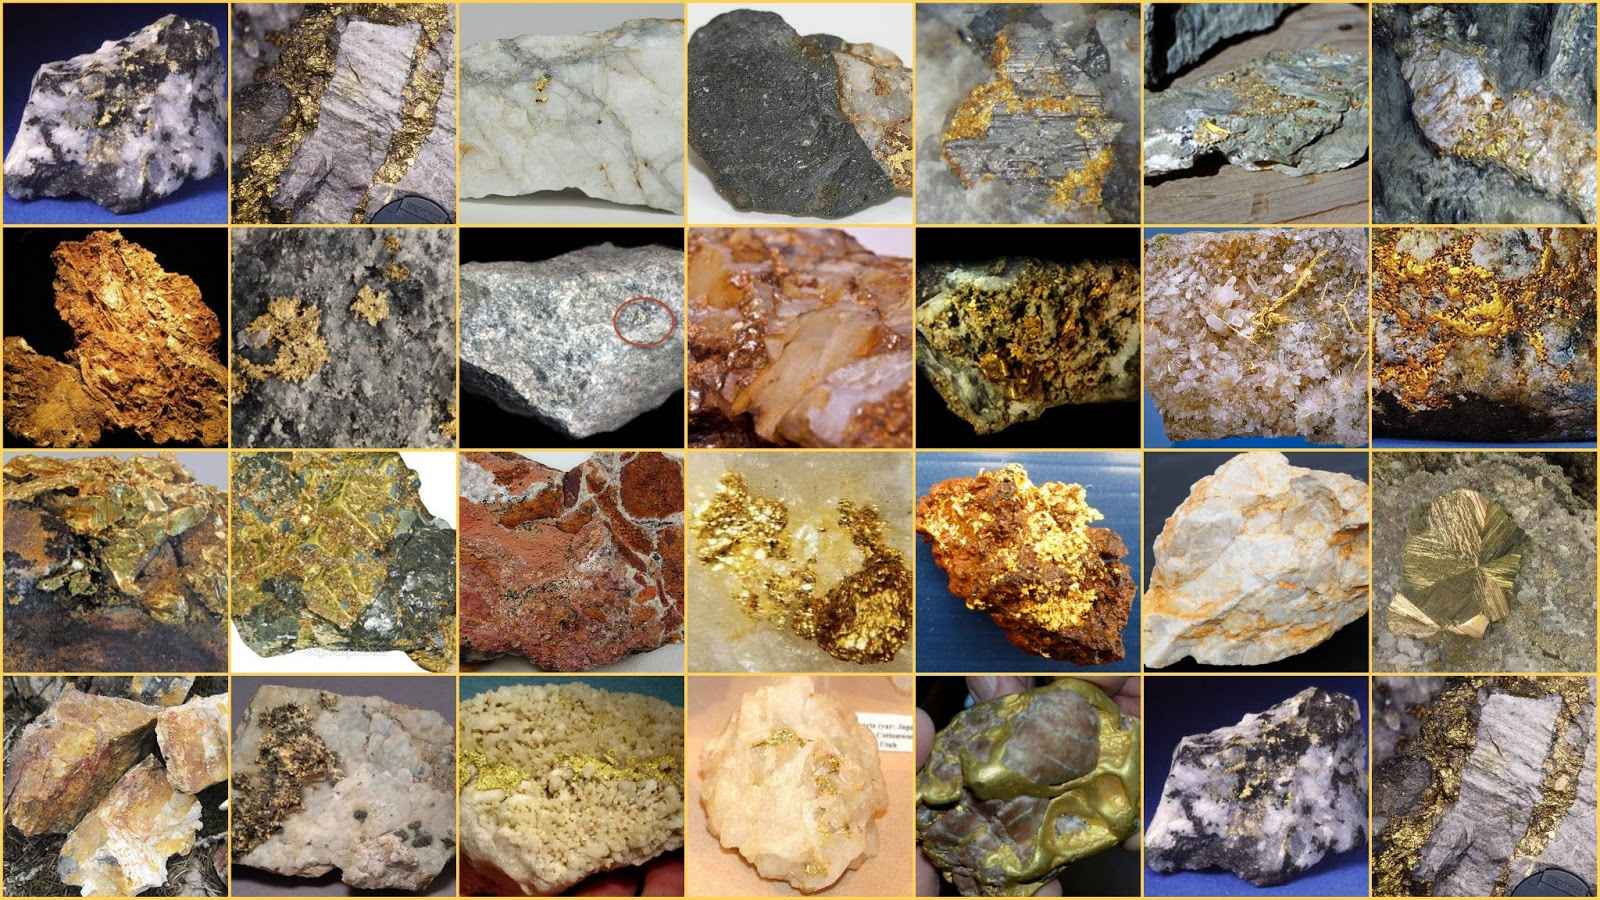 Uses of Mineral Resources in India